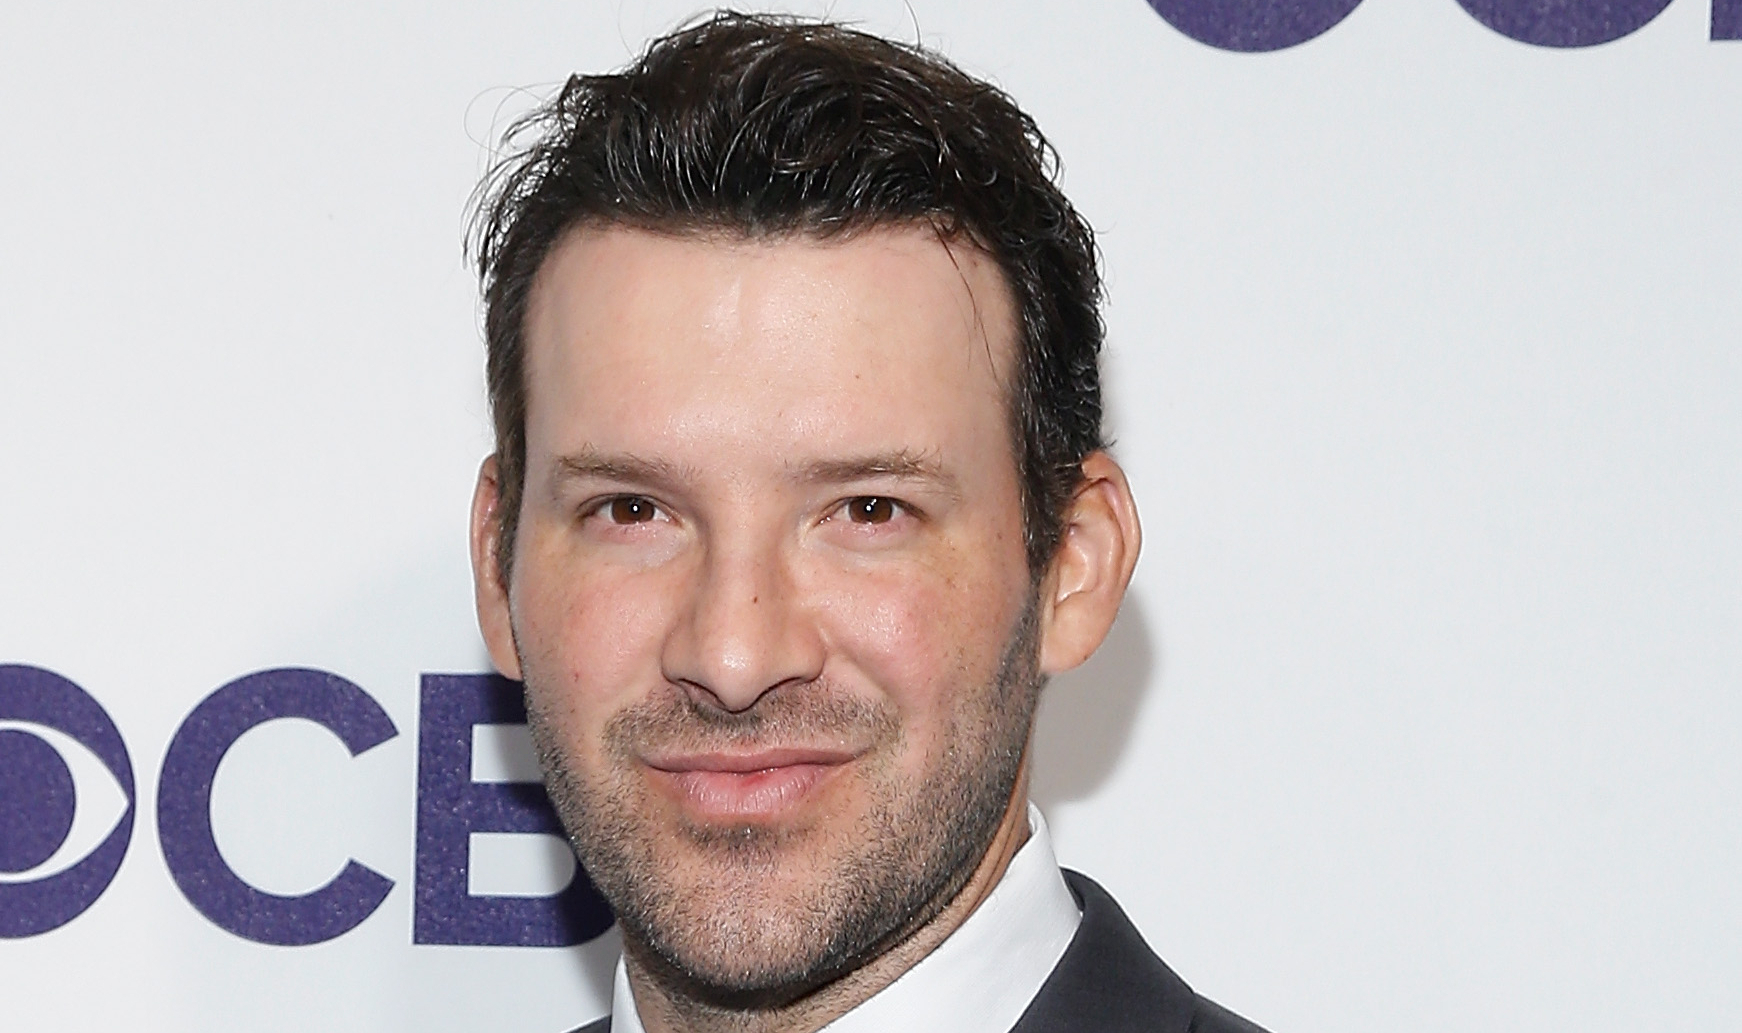 Tony Romo Signs 17 Million CBS Contract, Is HighestPaid NFL Analyst